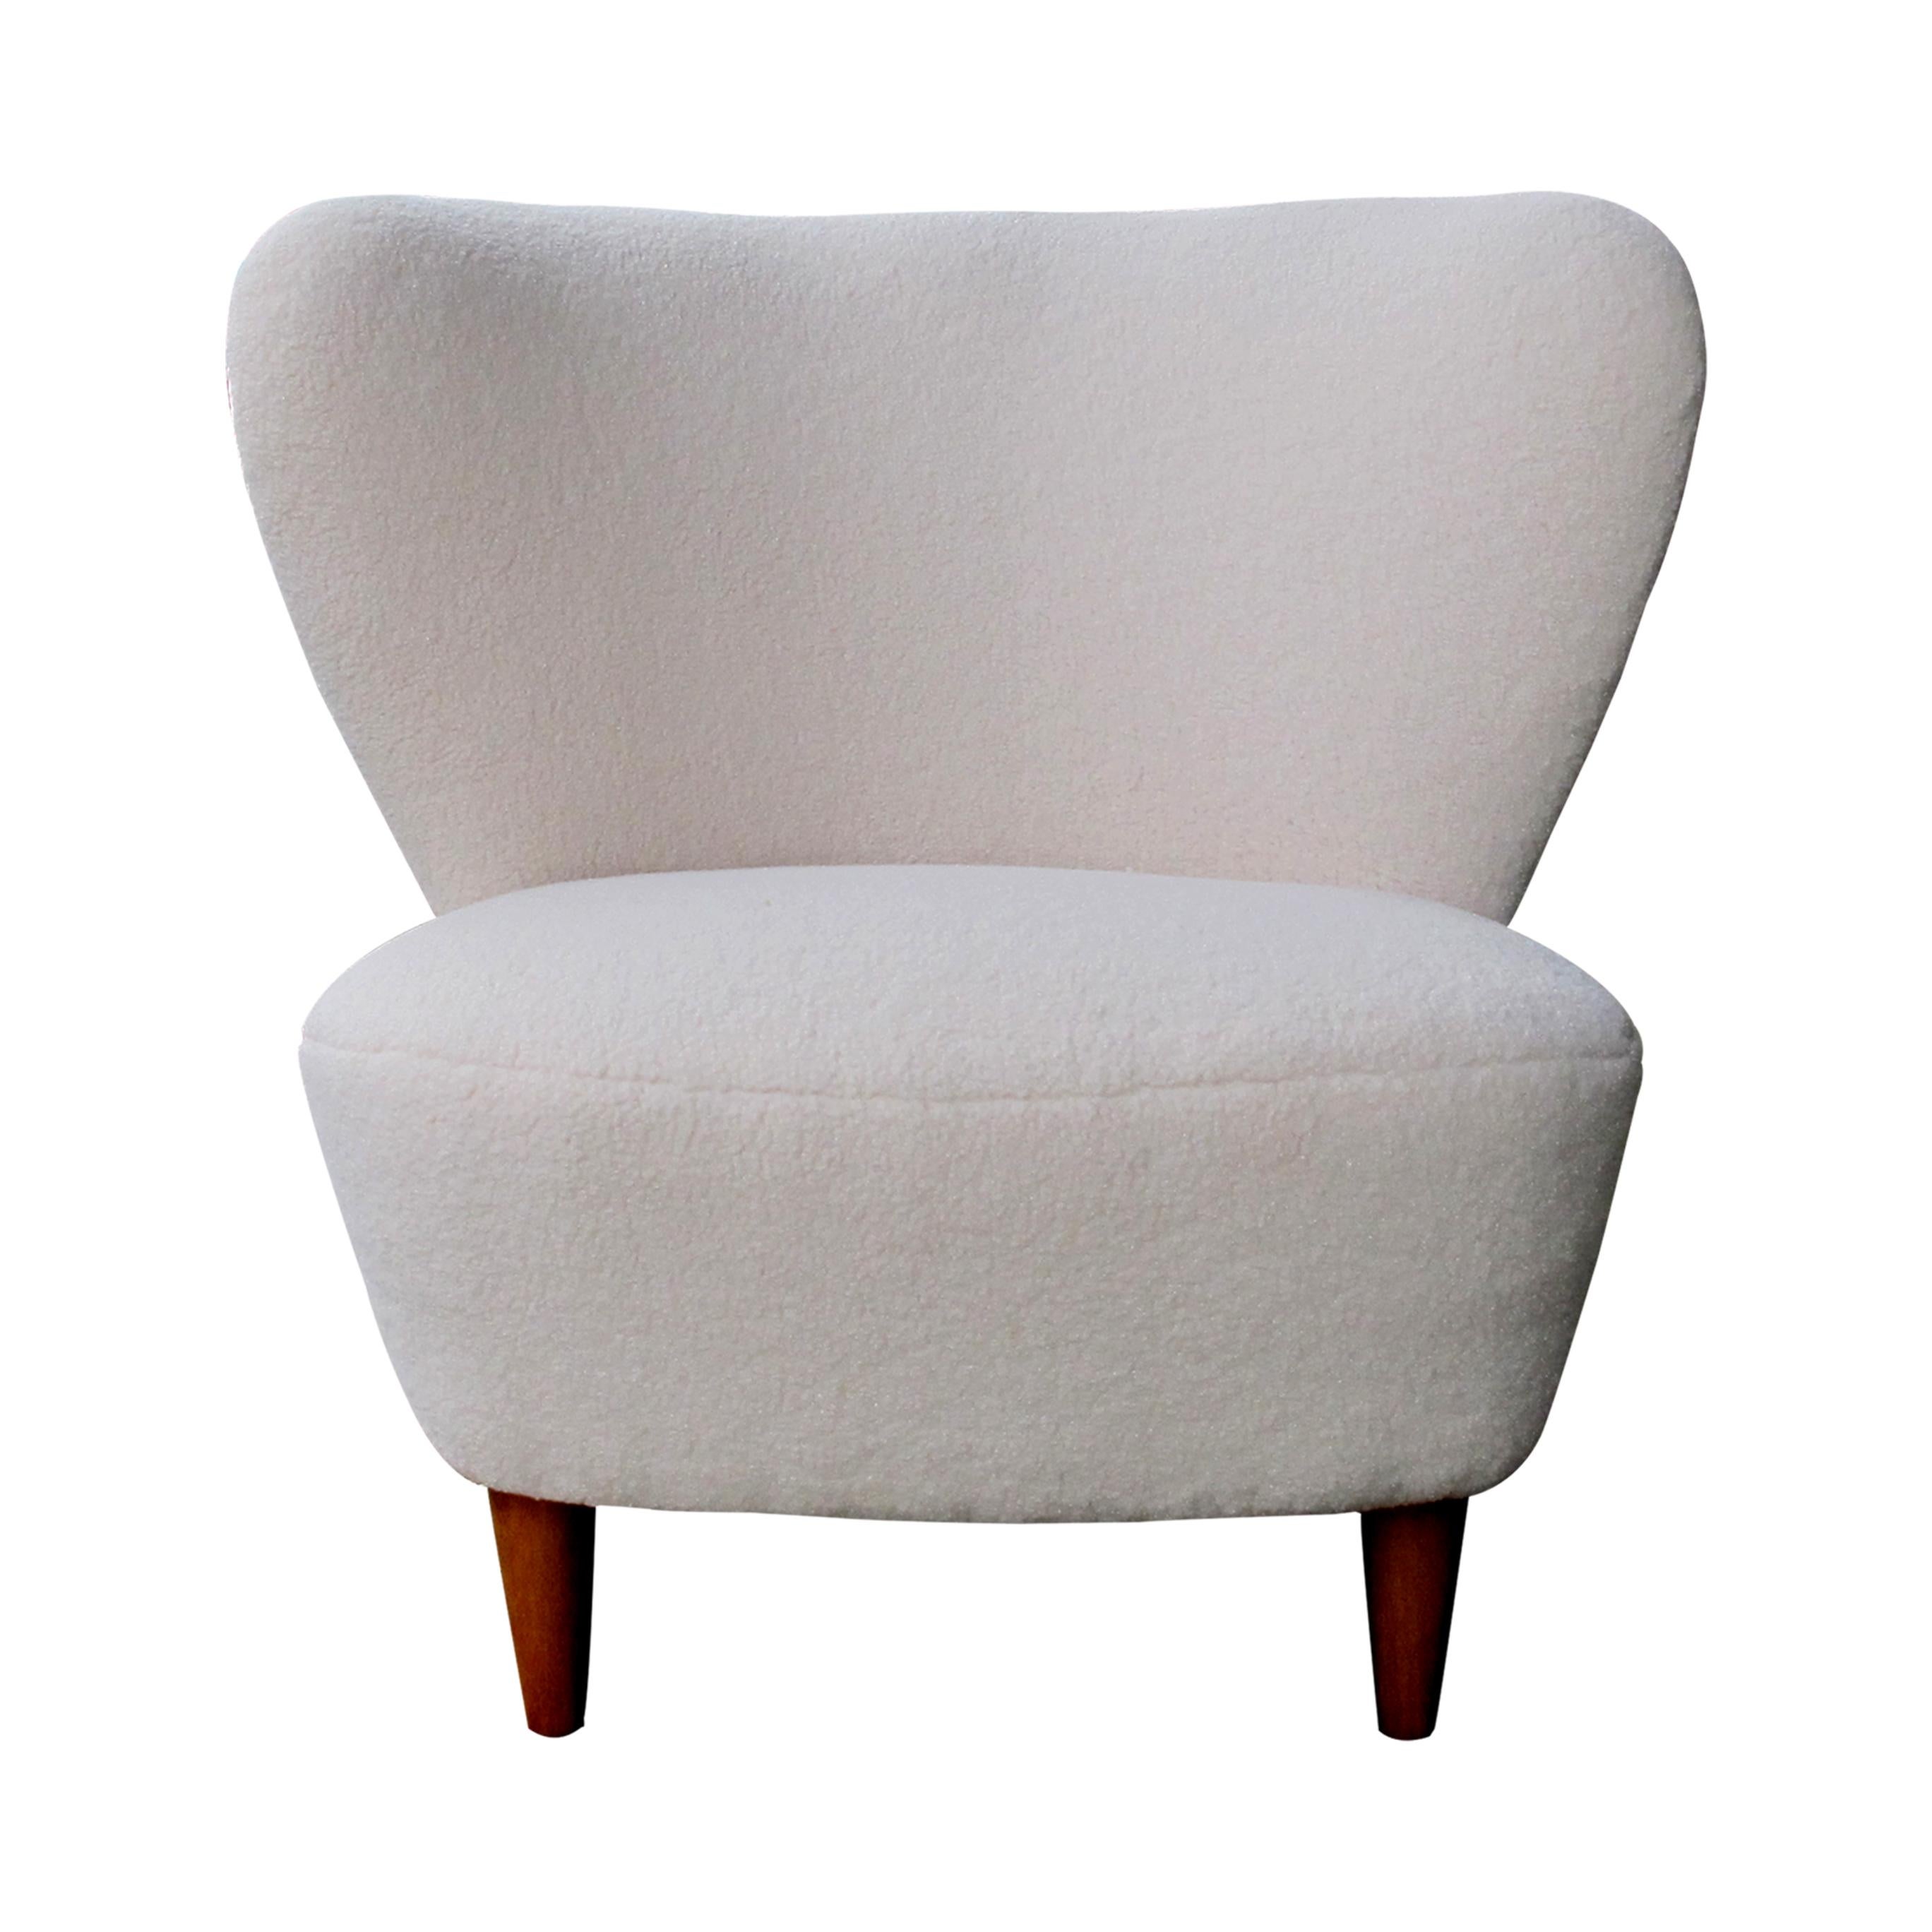 Pair of 1940s Swedish deep-seated armchairs with generous curved backrests designed by Gösta Jonsson. These armchairs/easy chairs are exceptionally well-proportioned and well-padded for extra comfort. The chairs are newly upholstered in light cream